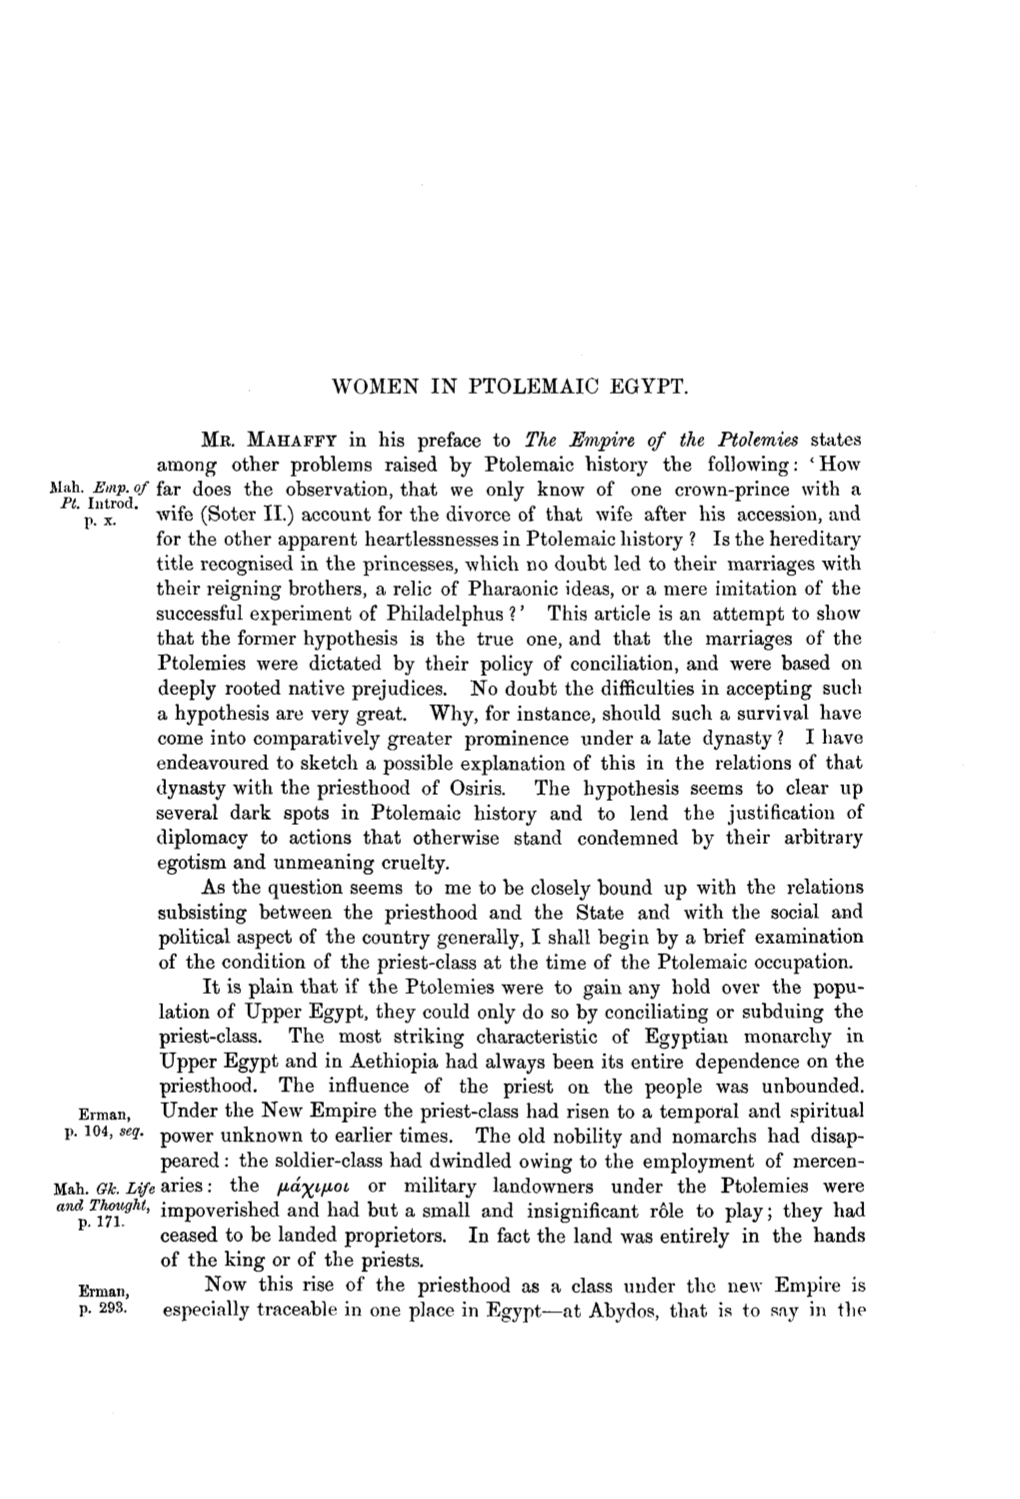 WOMEN in PTOLEMAIC EGYPT. MR. MAHAFFY in His Preface to The